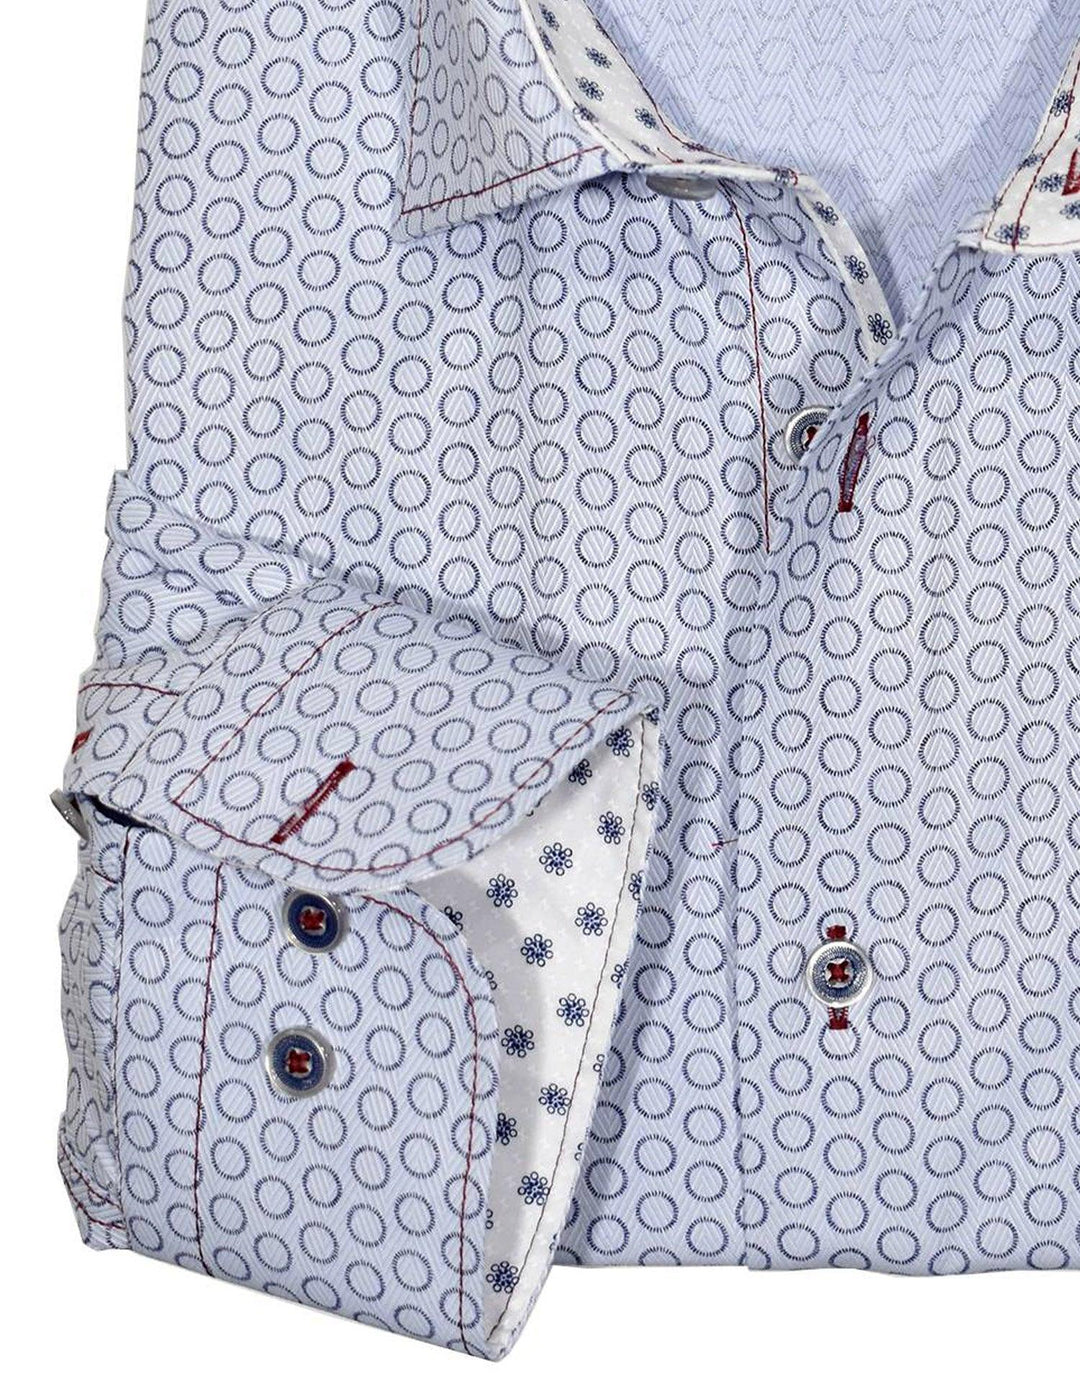 Ultra soft cotton. Fine cotton satin fabric. Custom selected buttons. 2 button signature cuffs. Matched trim fabric. Slim fit. Approximately 5'8" 150lbs is a perfect MD.